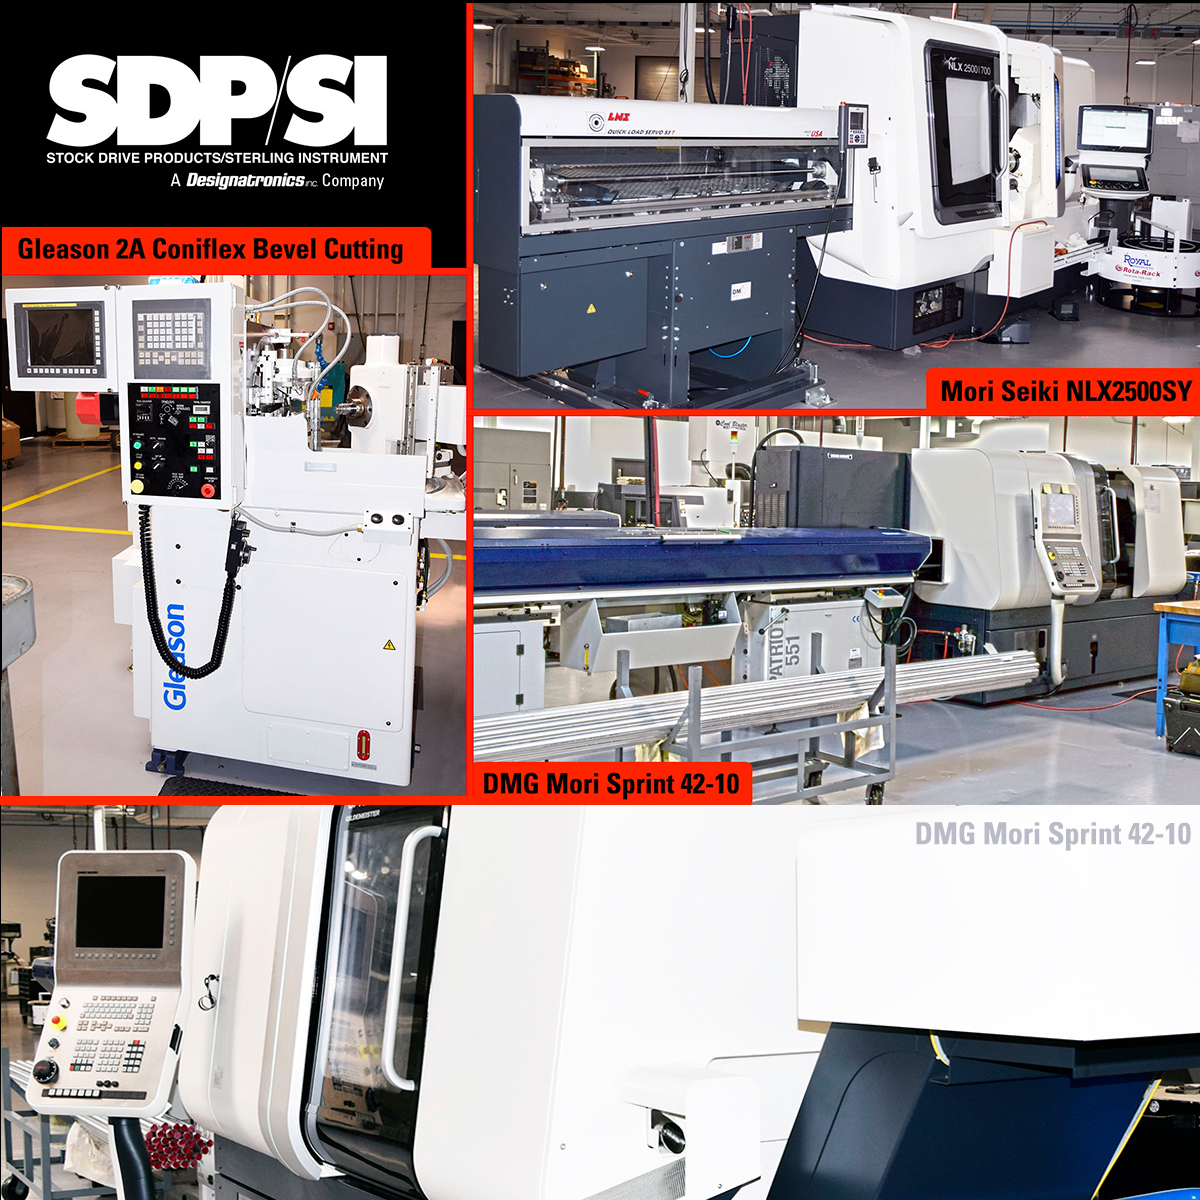 SDP/SI Adds Capabilities for High-Volume Production